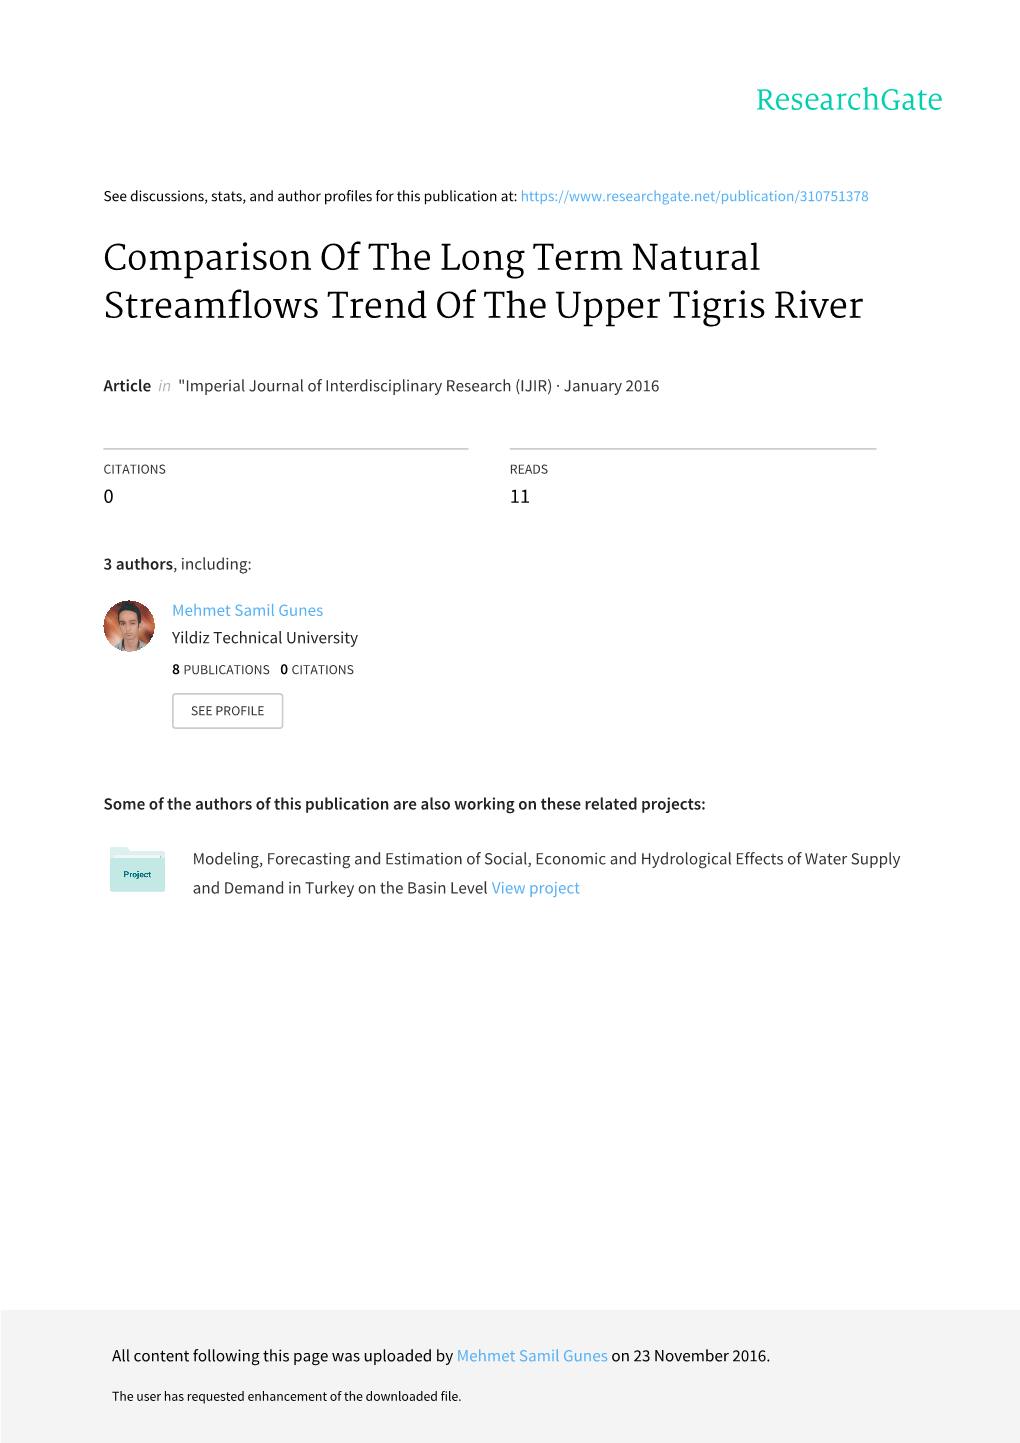 Comparison of the Long Term Natural Streamflows Trend of the Upper Tigris River